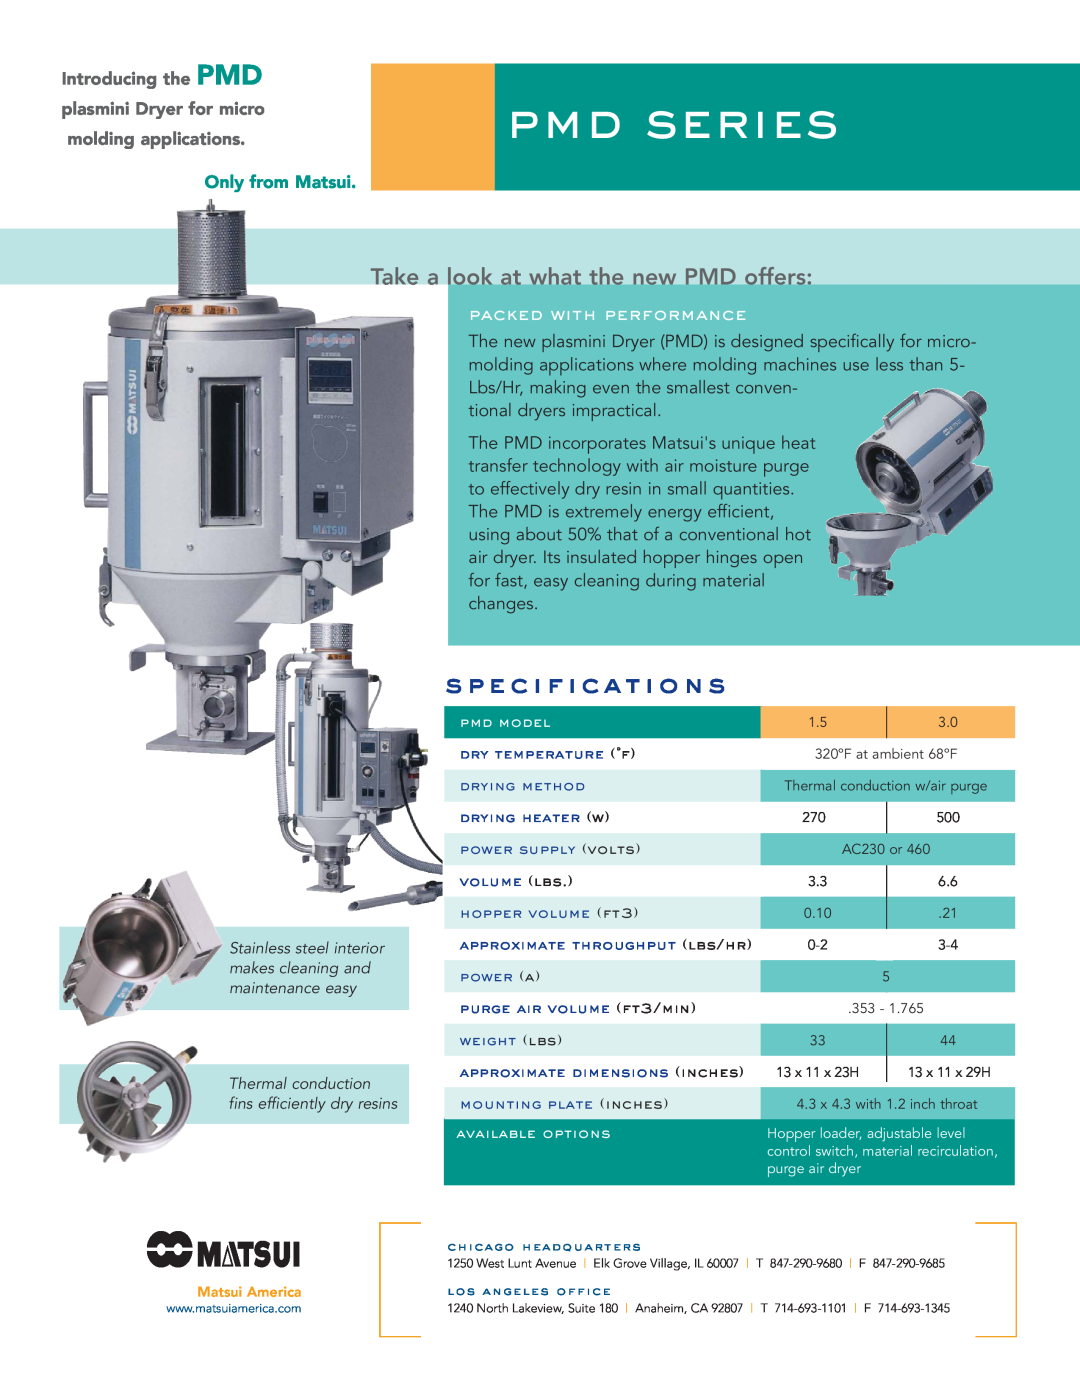 Matsui America PMD Series manual s p e c i f i c a t i o n s, Take a look at what the new PMD offers, Introducing the PMD 